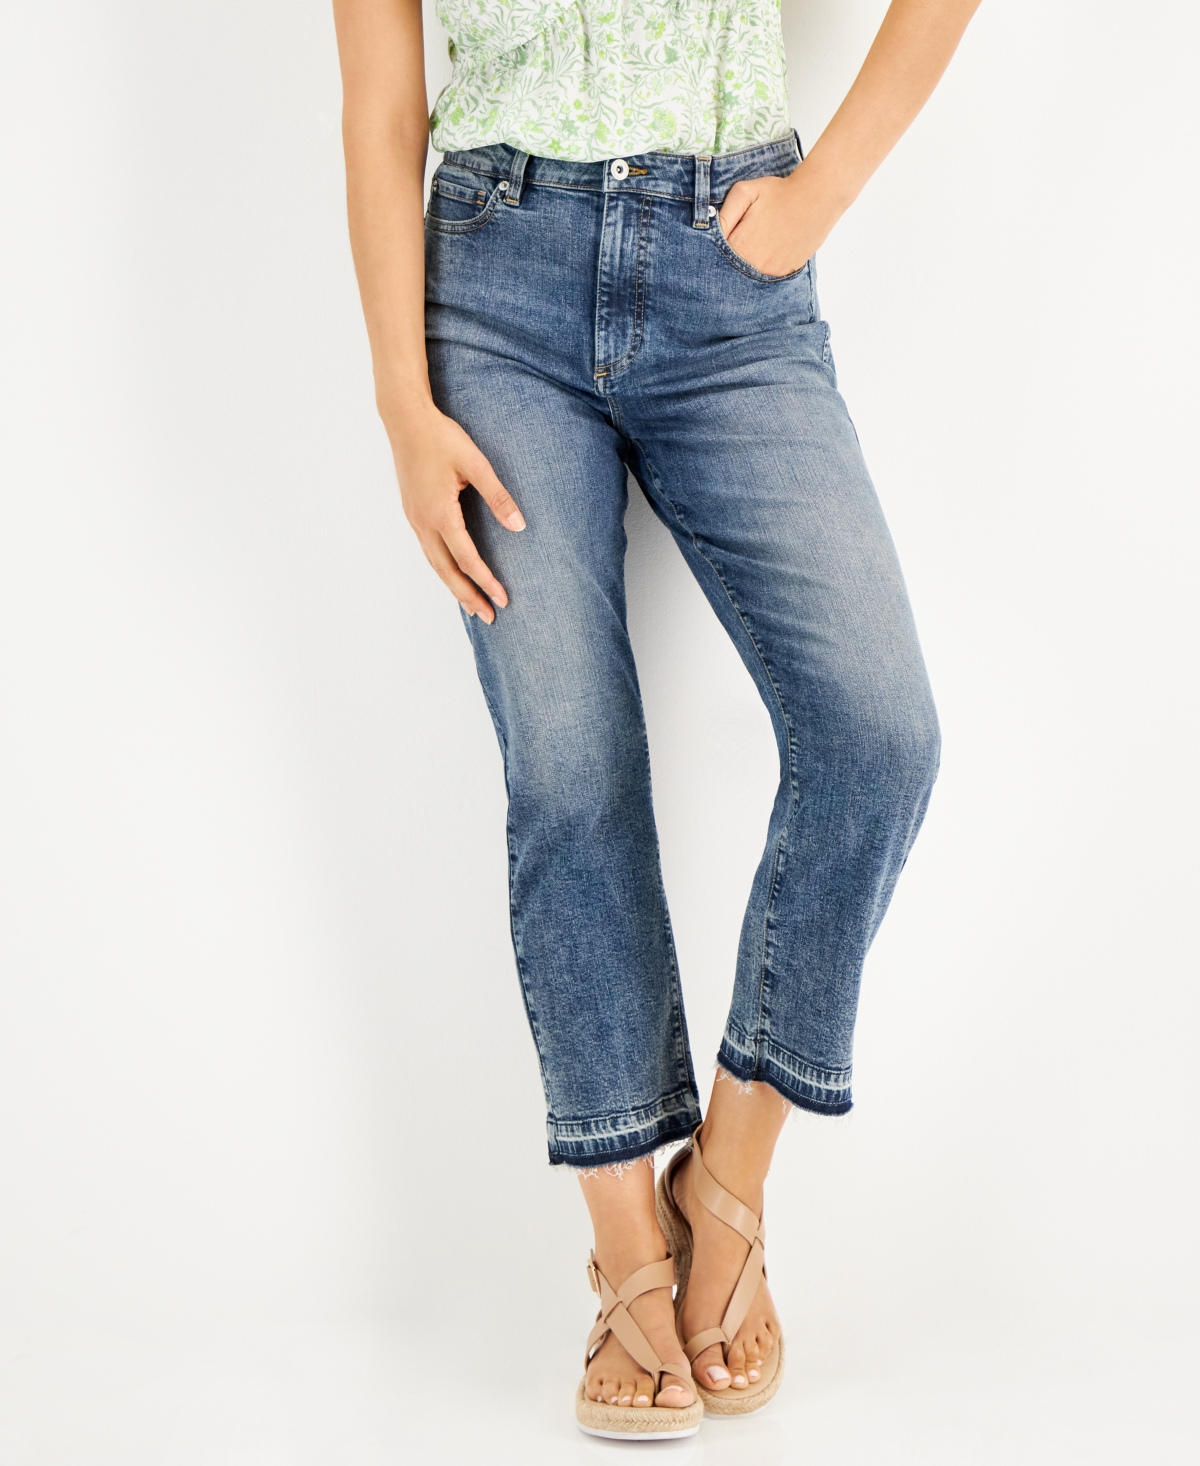  Inc International Concepts Women's Cropped High-Rise Jeans, Created for Macy's